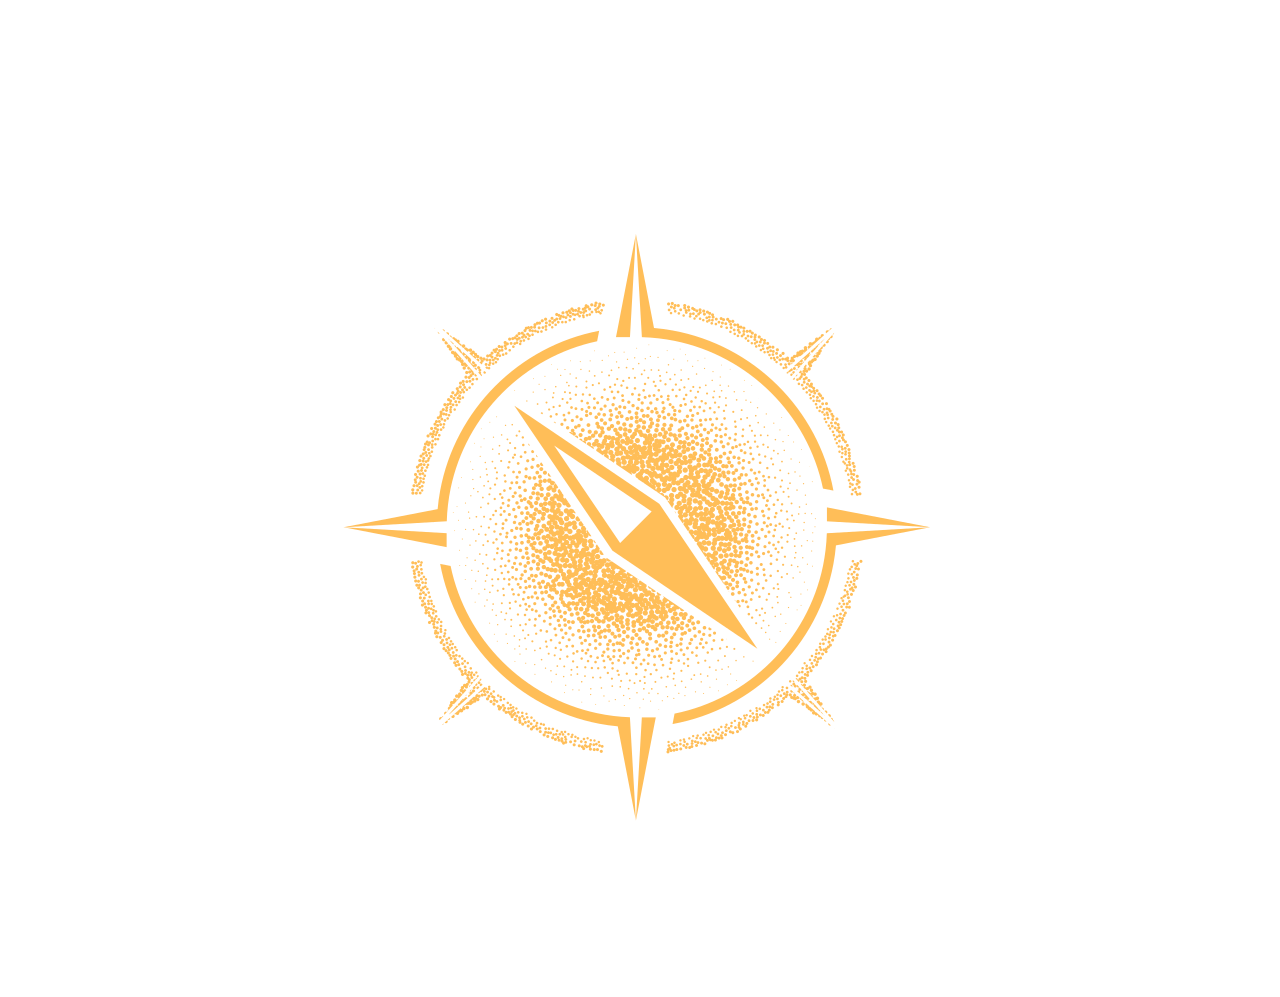 COMPASS FREIGHT 's web page